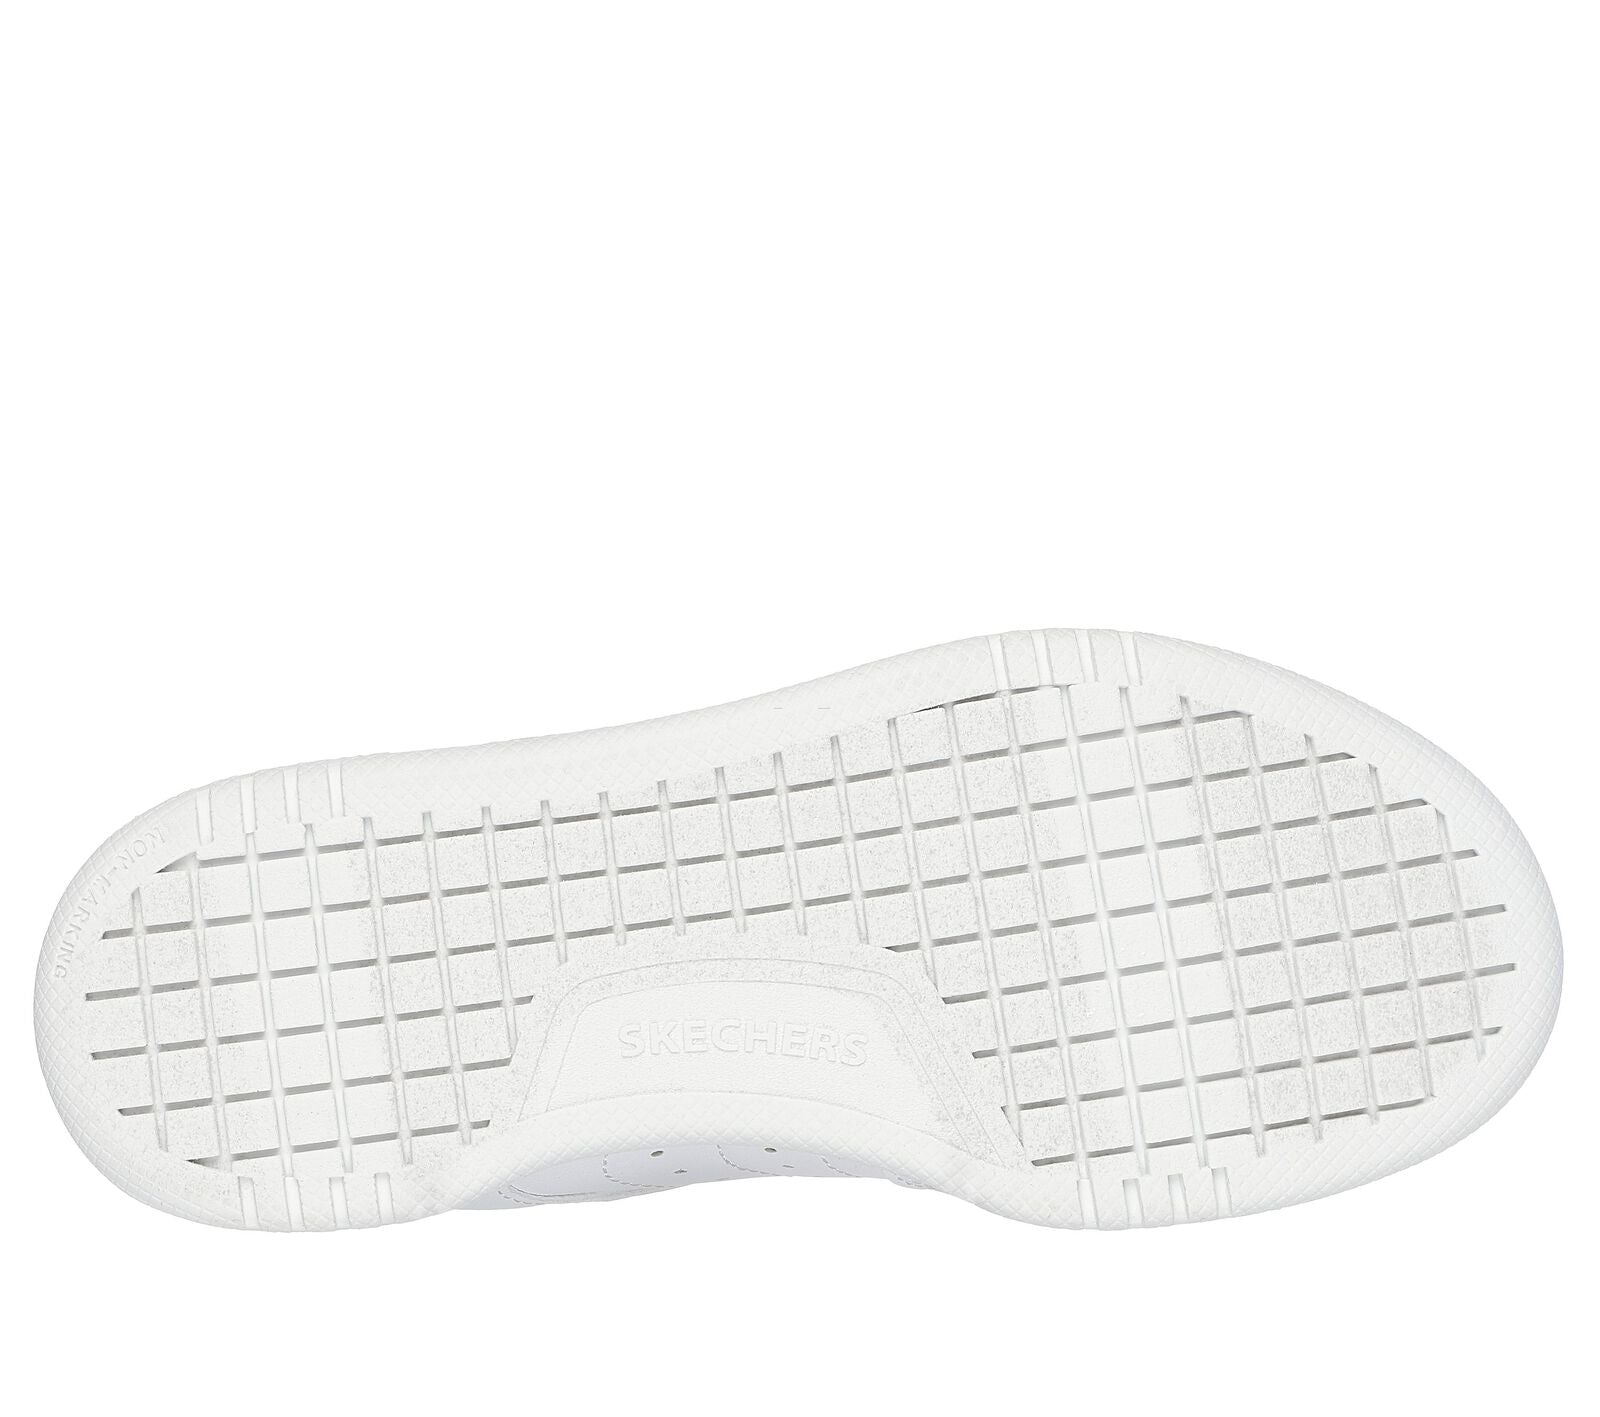 Skechers Quick Street, a sporty white trainer with grey lining, featuring the Skechers logo. Velcro fastening with flat stretch bungee laces. Sole view.